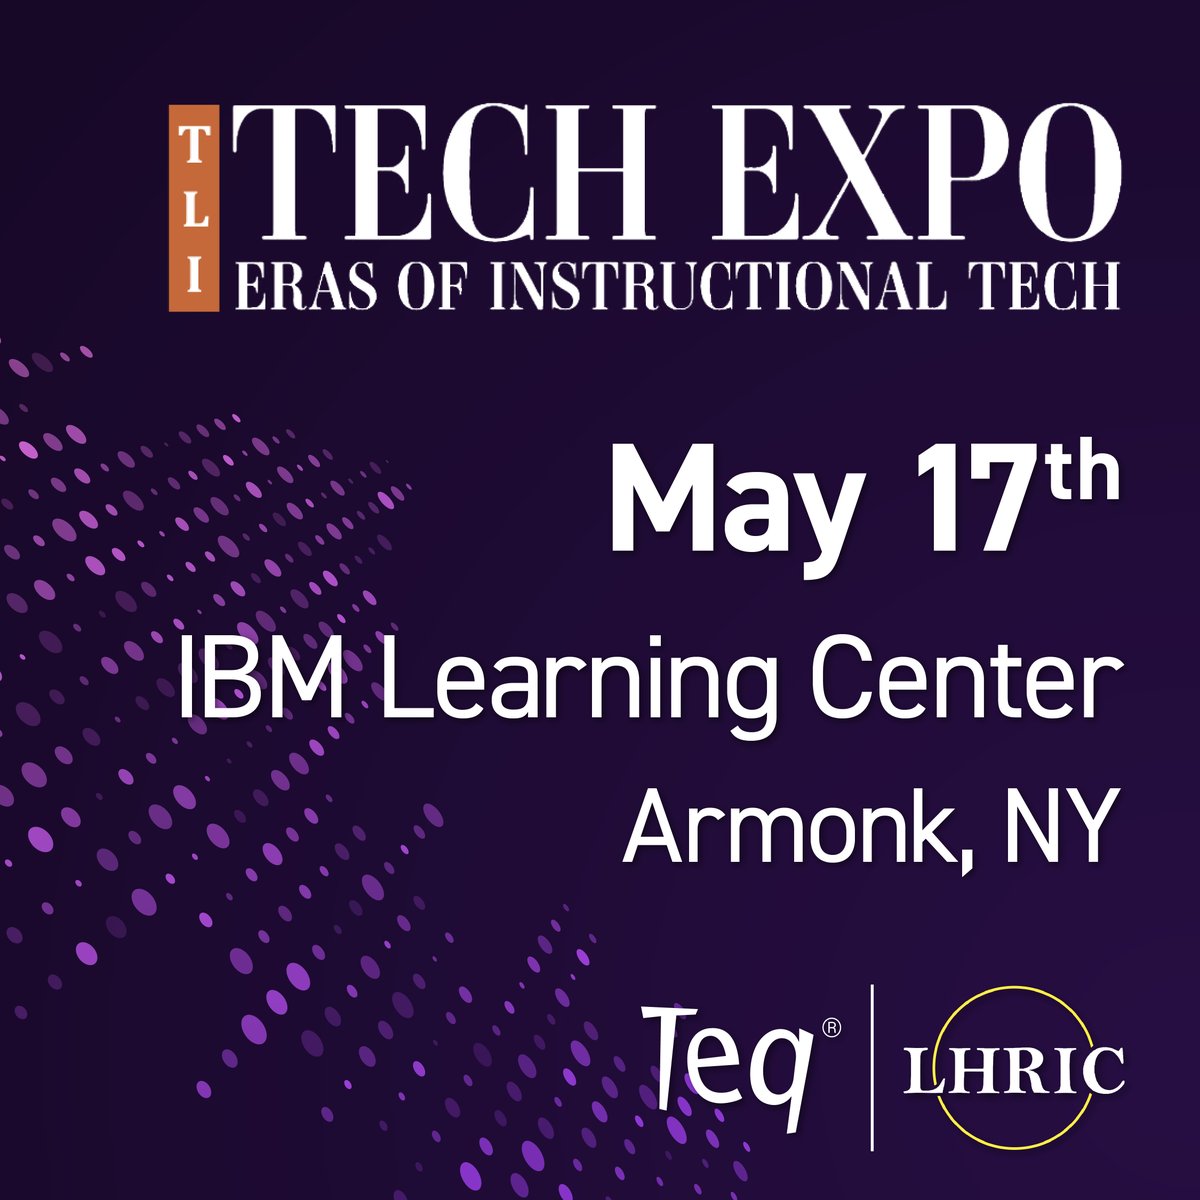 Are you ready to travel through the eras of instructional tech with us at LHRIC TLI Tech Expo? We'll be at this annual event on 5/17 in Armonk, NY, as a Diamond Sponsor, showcasing all of our amazing #edtech solutions! #edtech #LHRICTLI #TechExpo2024 #STEAM @LHRICit